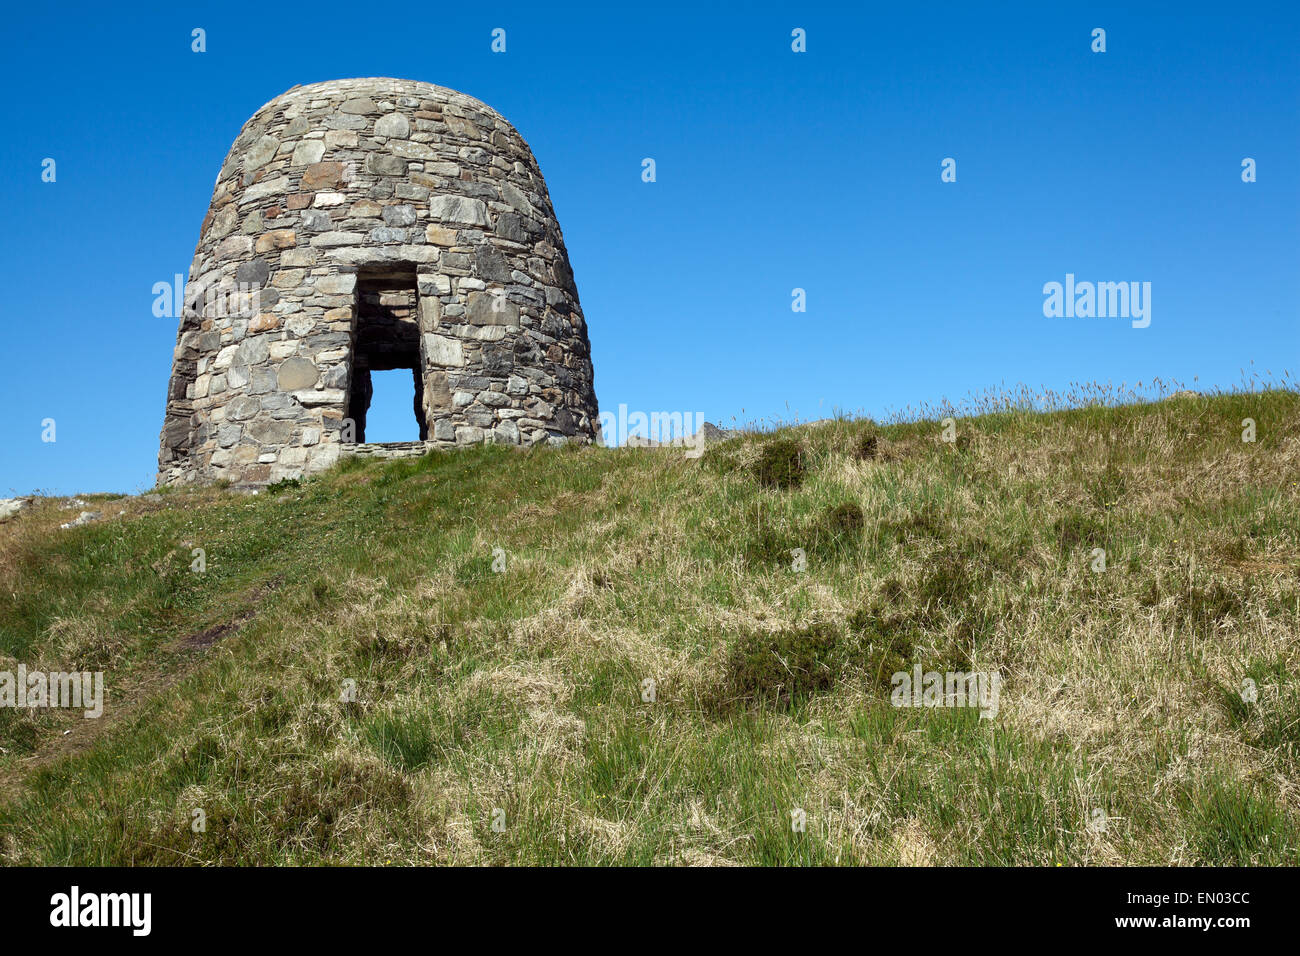 Memorial cairn on the isle of Lewis, Scotland Stock Photo